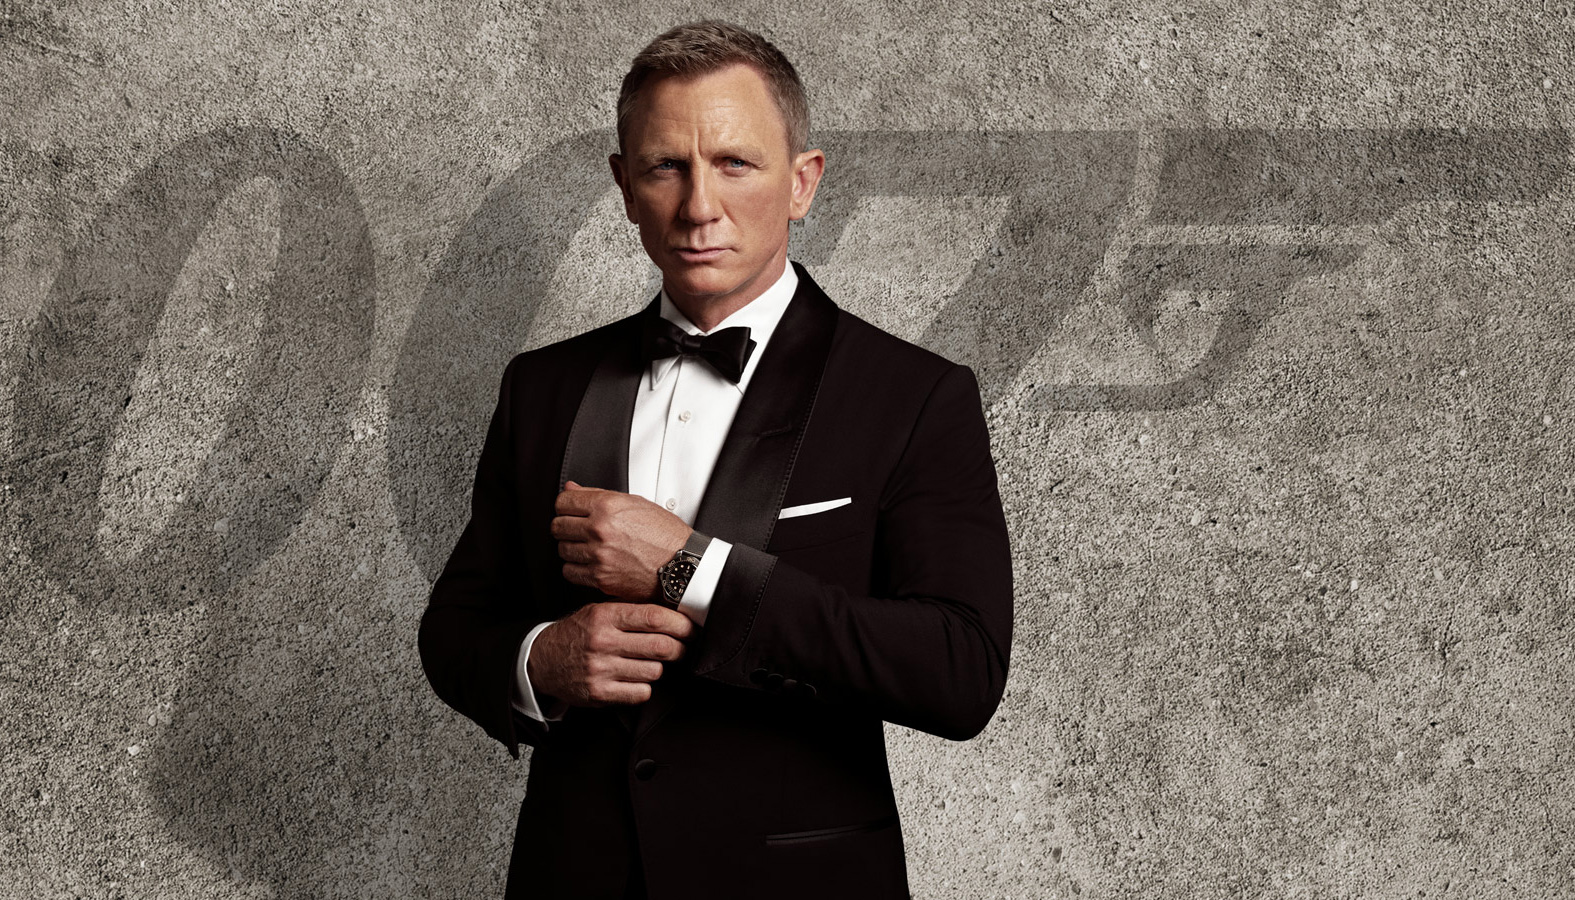 James Bond movie 'No Time To Die' slated to have world's largest premier